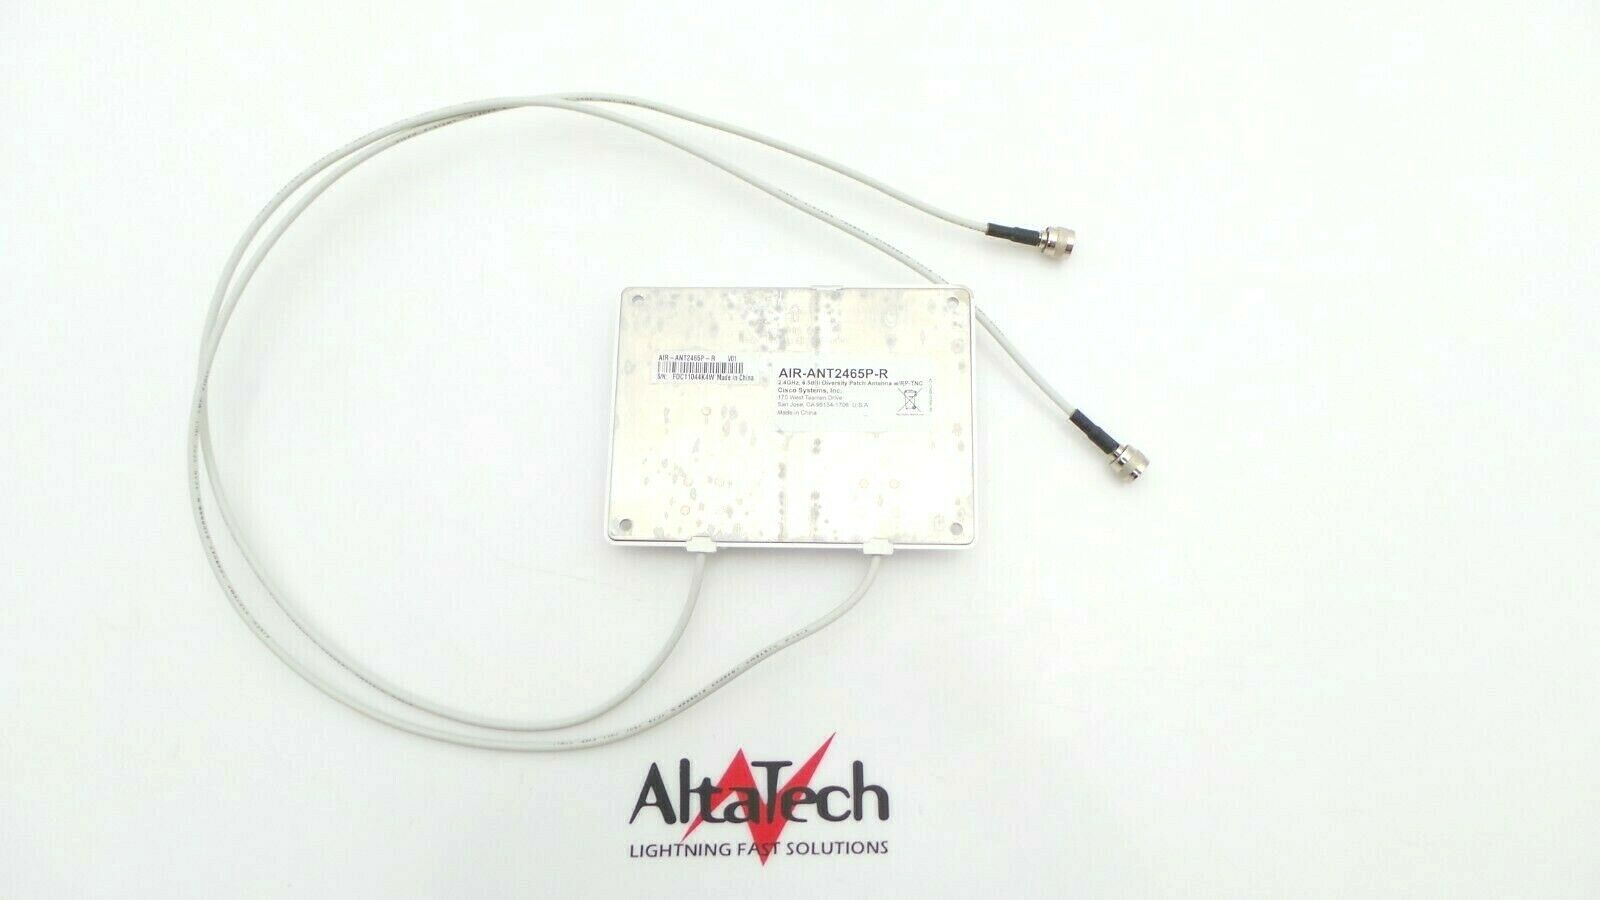 Dell AIR-ANT2465P-R 2.4 GHz 6.5 dBi Diversity Patch Antenna, Used